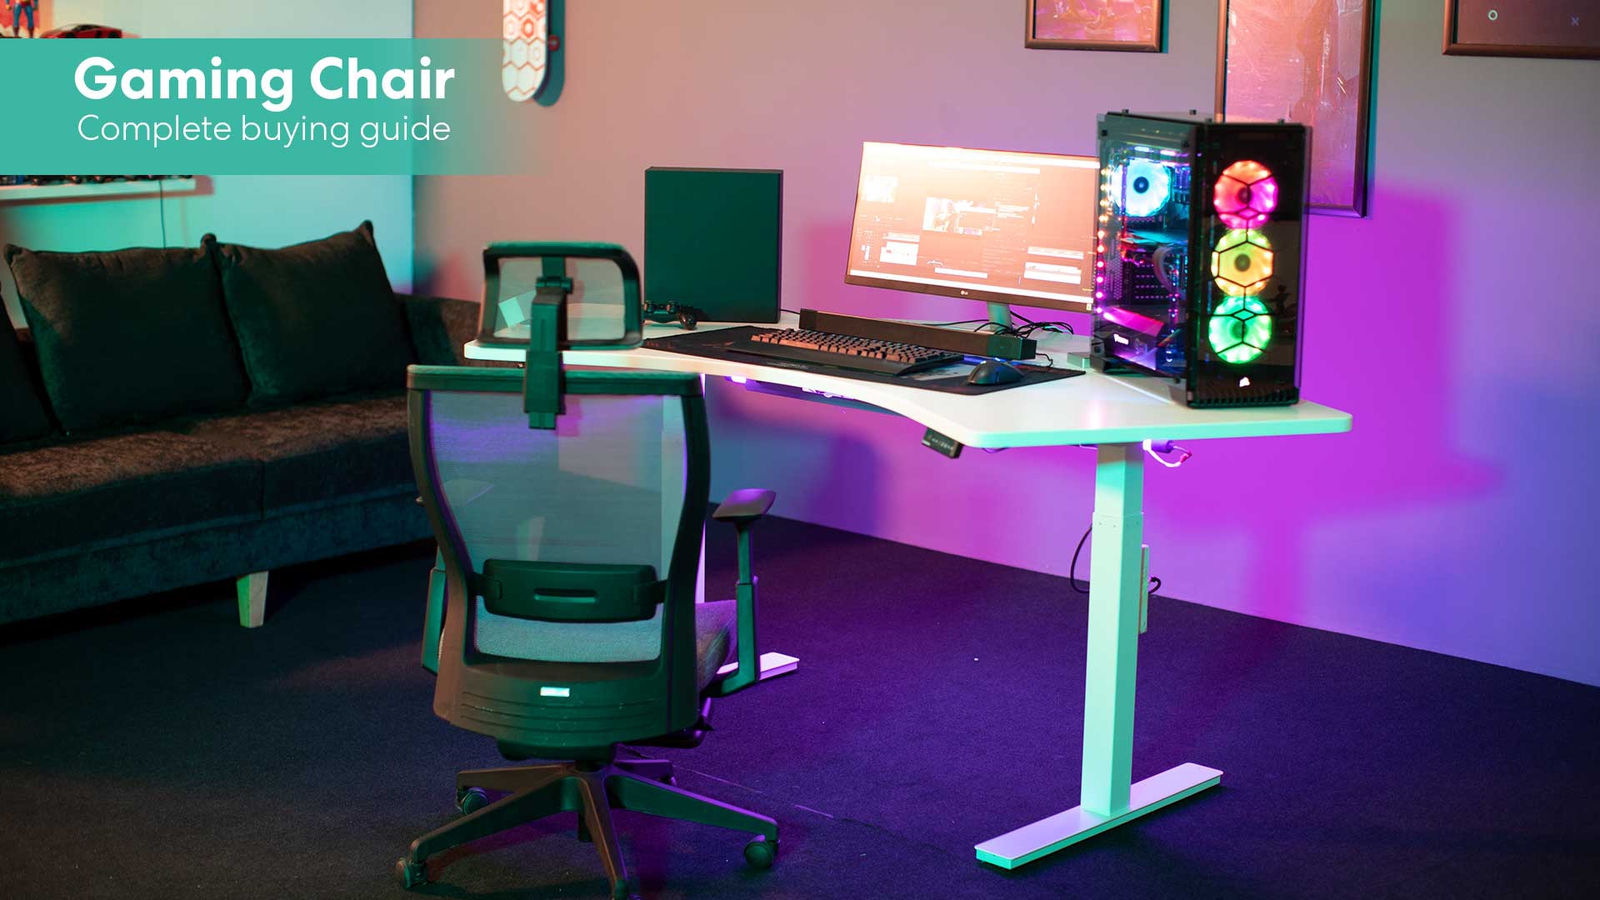 Gaming Chair - A Complete Buying Guide